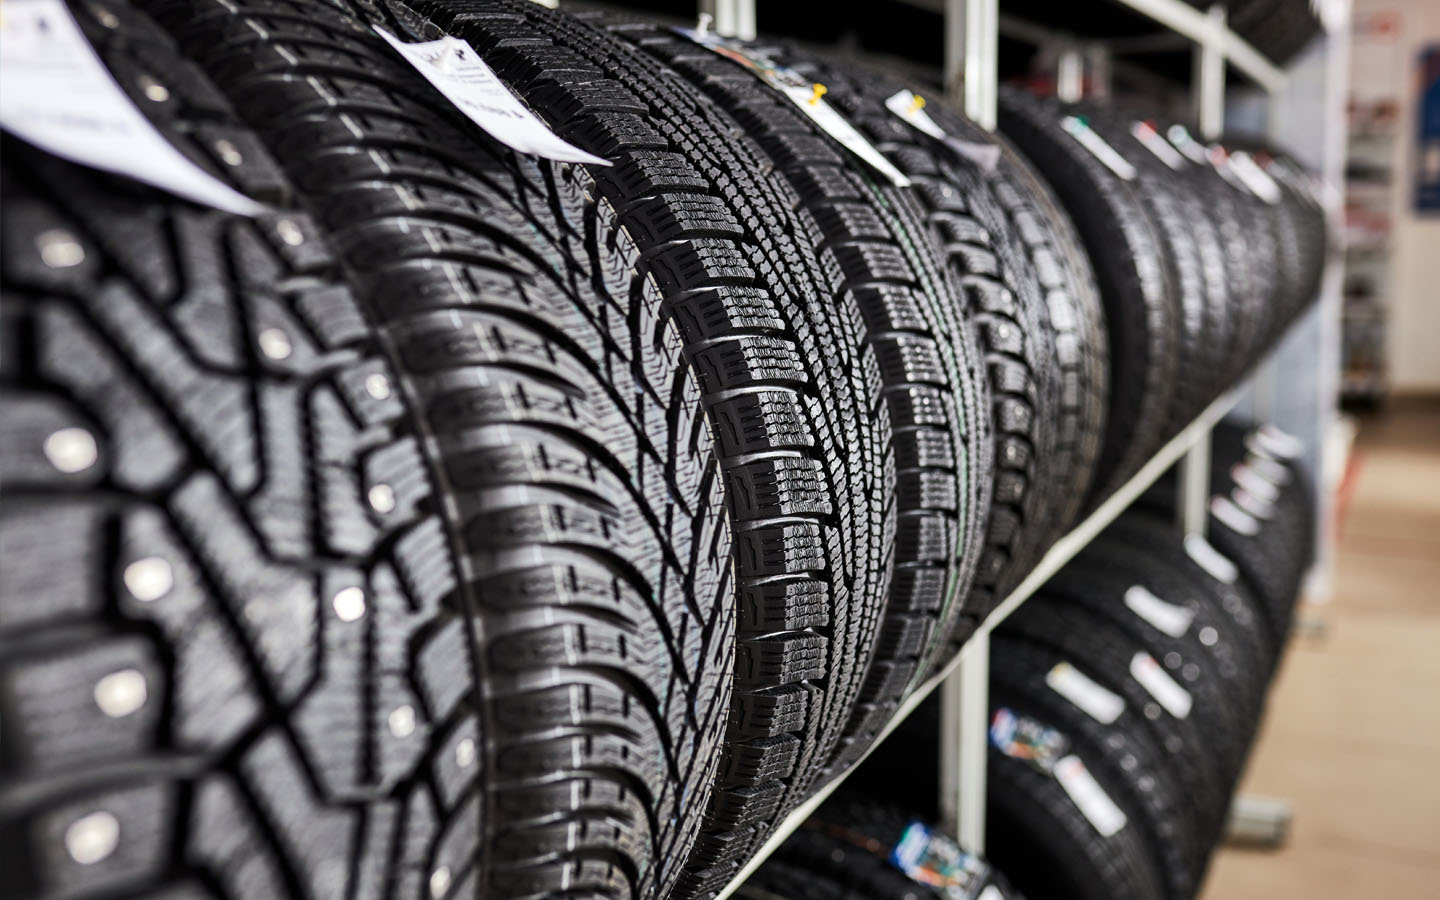 narrow tyres offer fuel-efficiency as compared to wide tyres